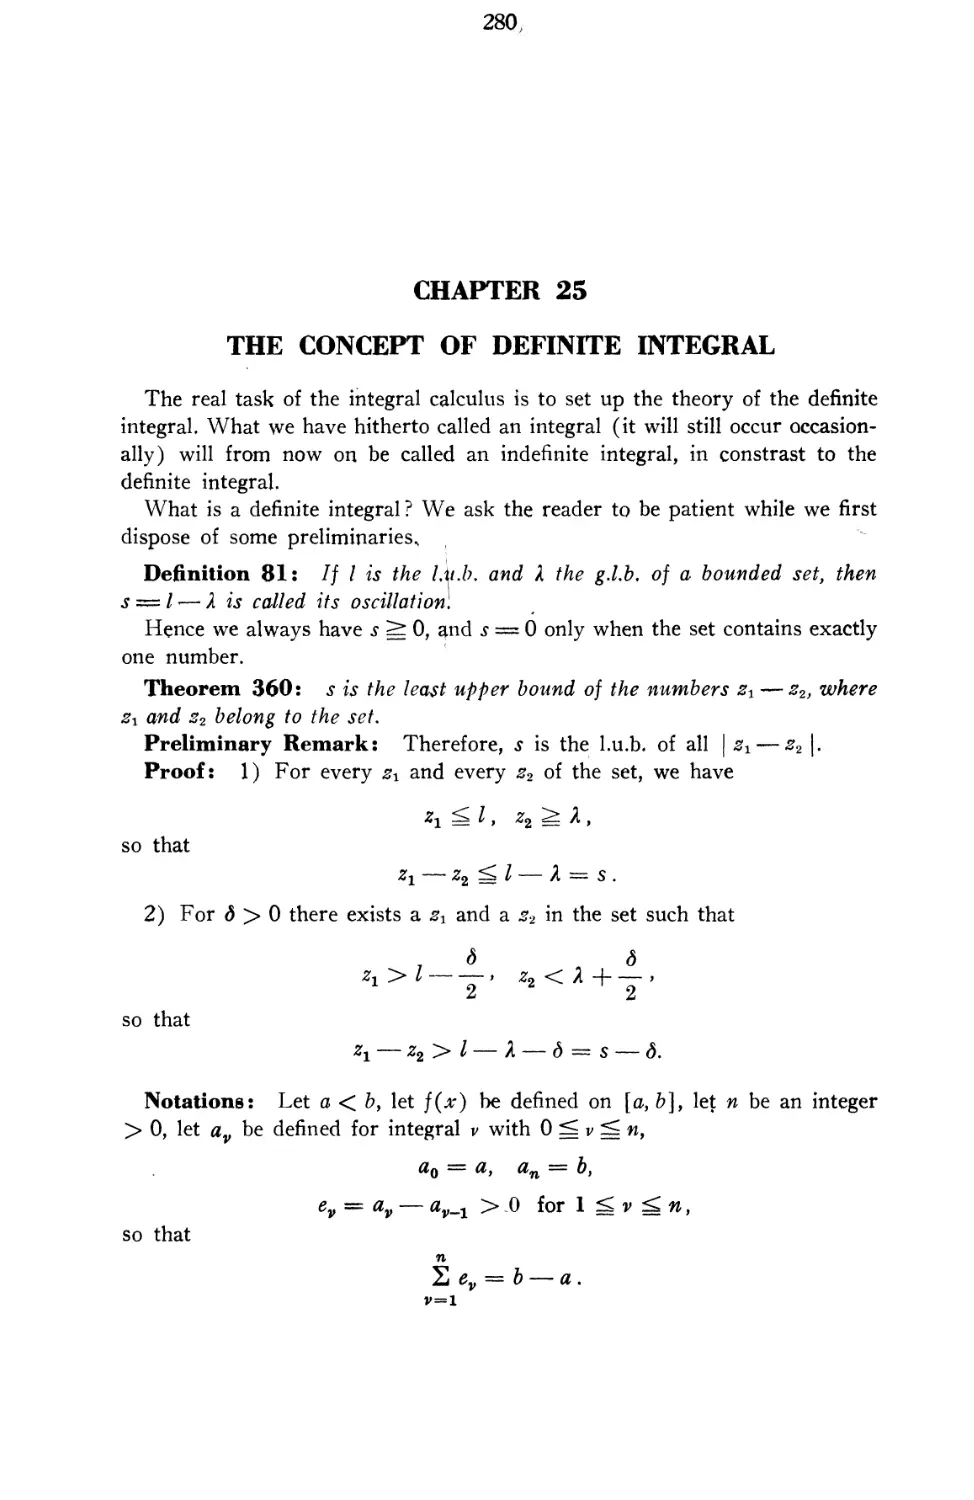 Chapter 25 Concept of the Definite Integral